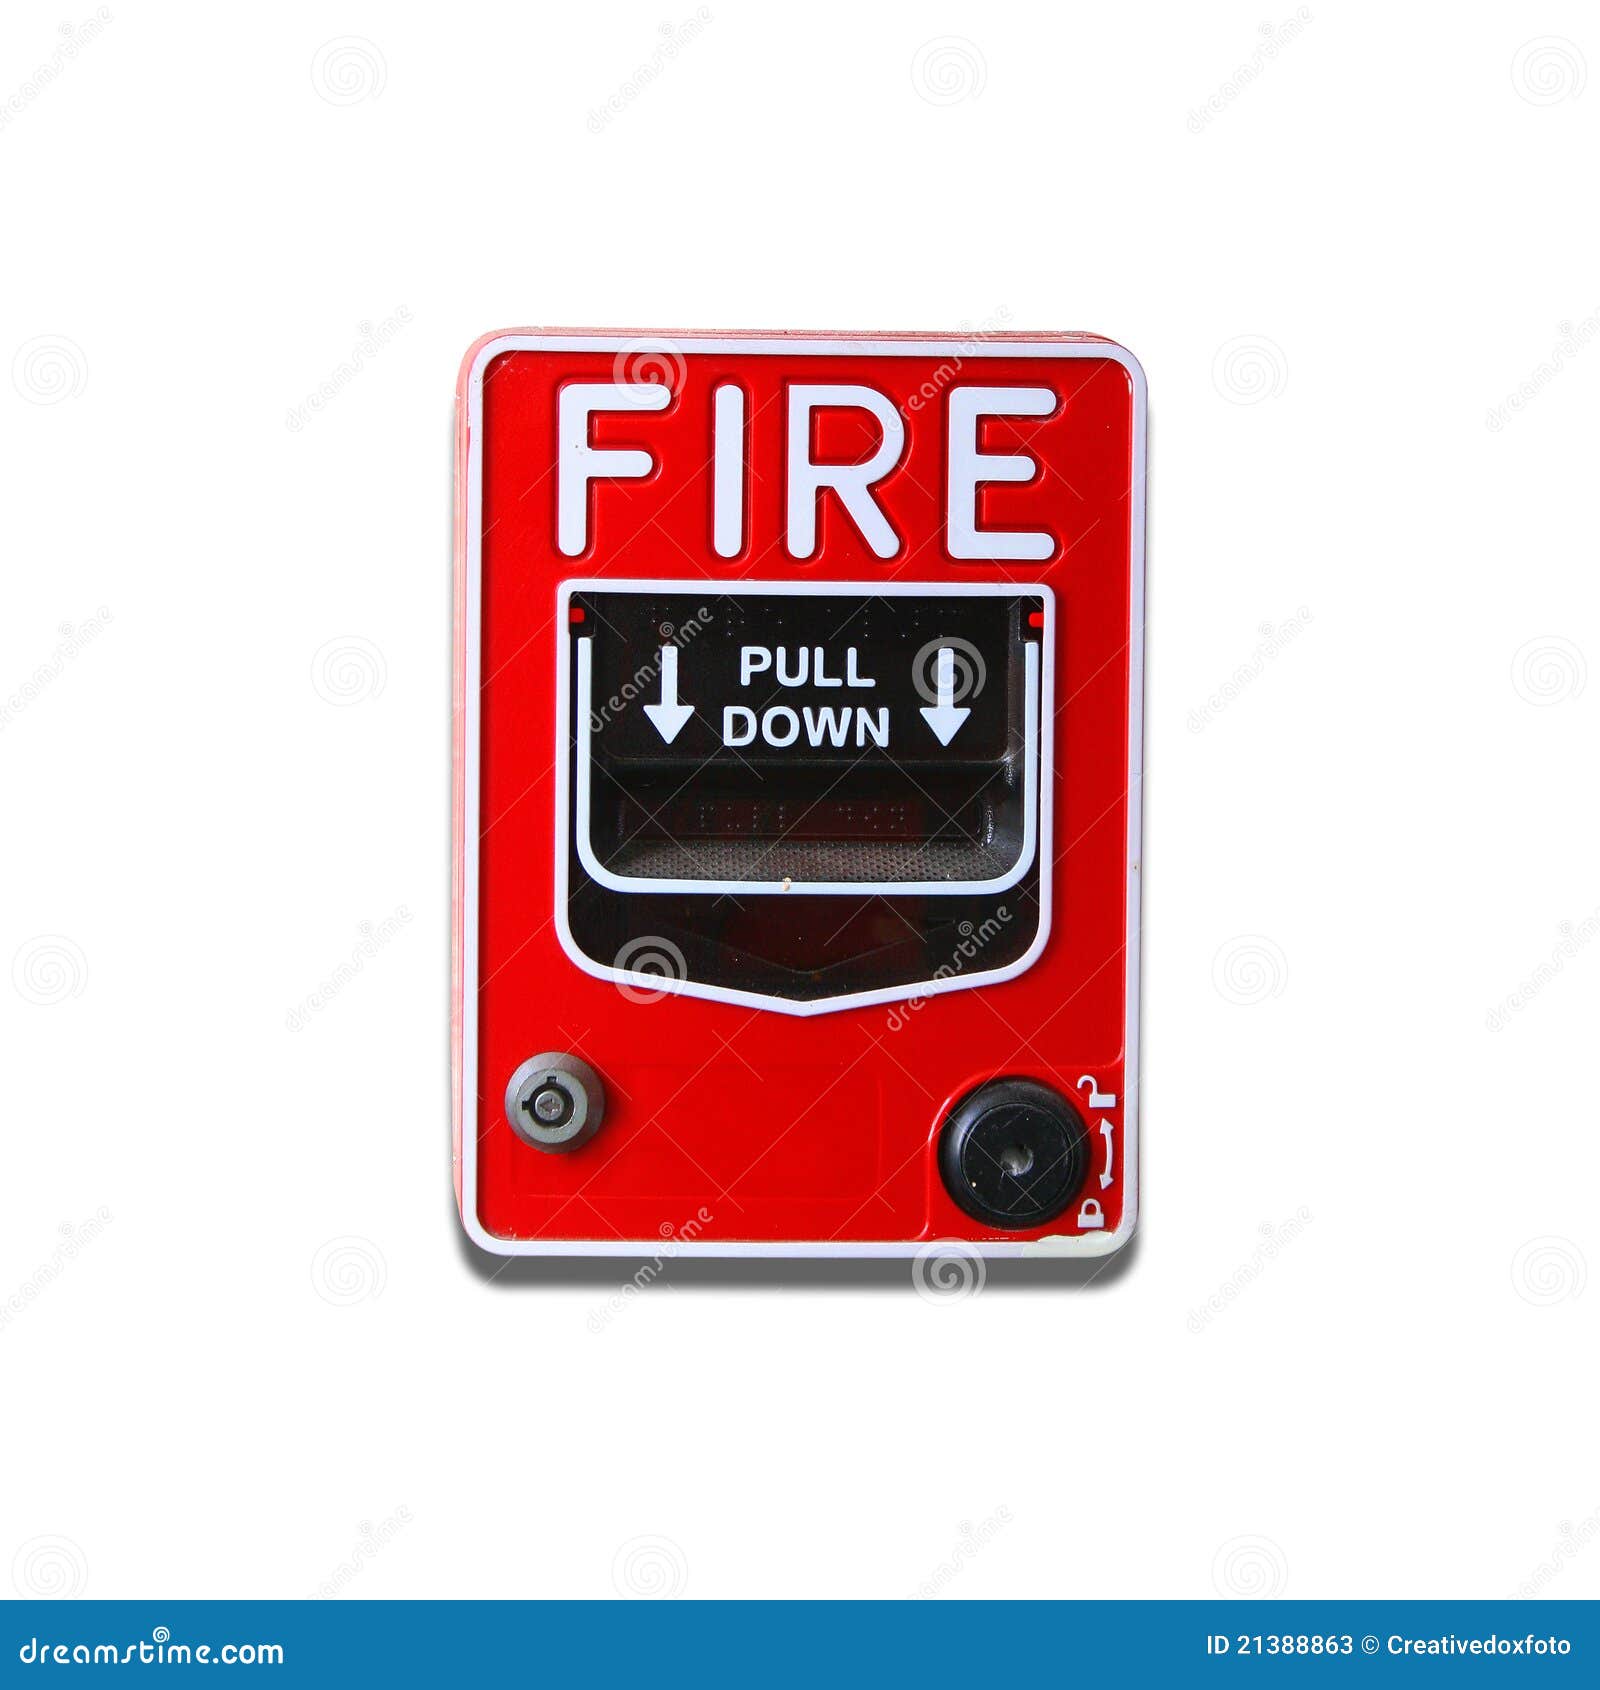 fire panel clipart - photo #18